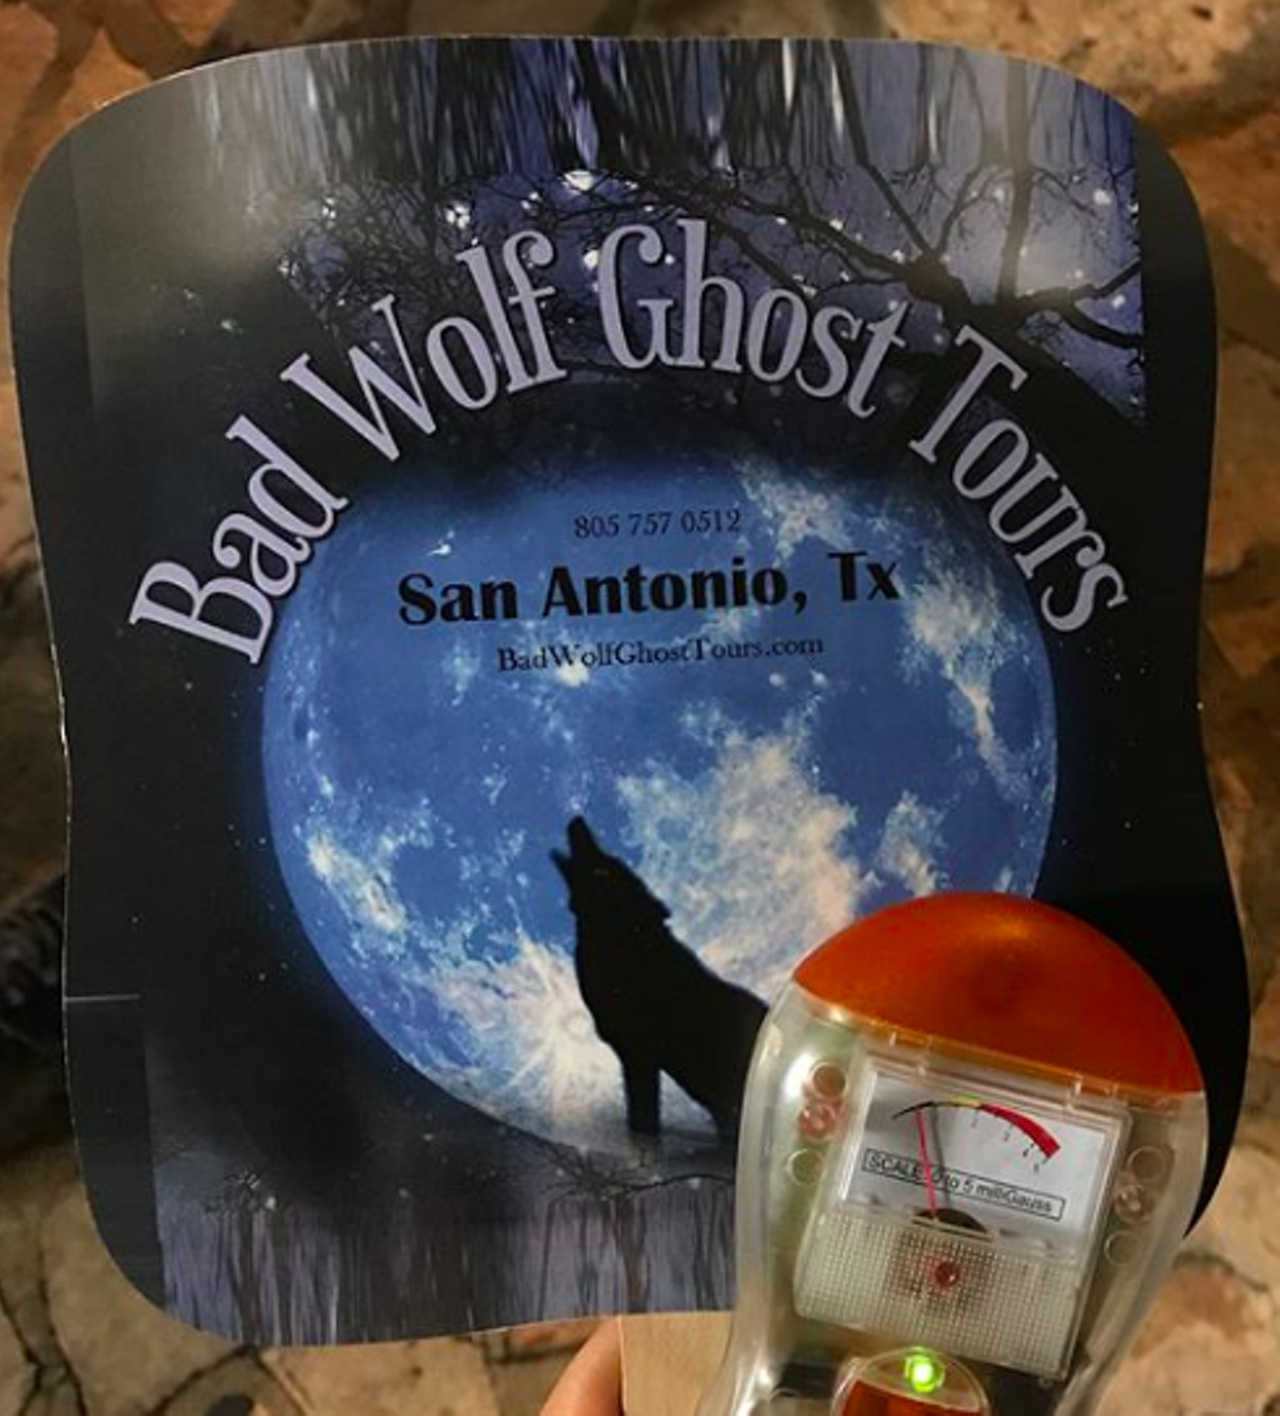 Bad Wolf Ghost Tours
Around San Antonio, (805) 757-0512, badwolfghosttours.com
Skip the usual tours and go to one that really appeals to you – a haunted pub crawl! If you don’t feel like getting boozy, don’t fret. Other options include the Secret Society ghost tour and the San Antonio ghost walk.
Photo via Instagram / michie.21